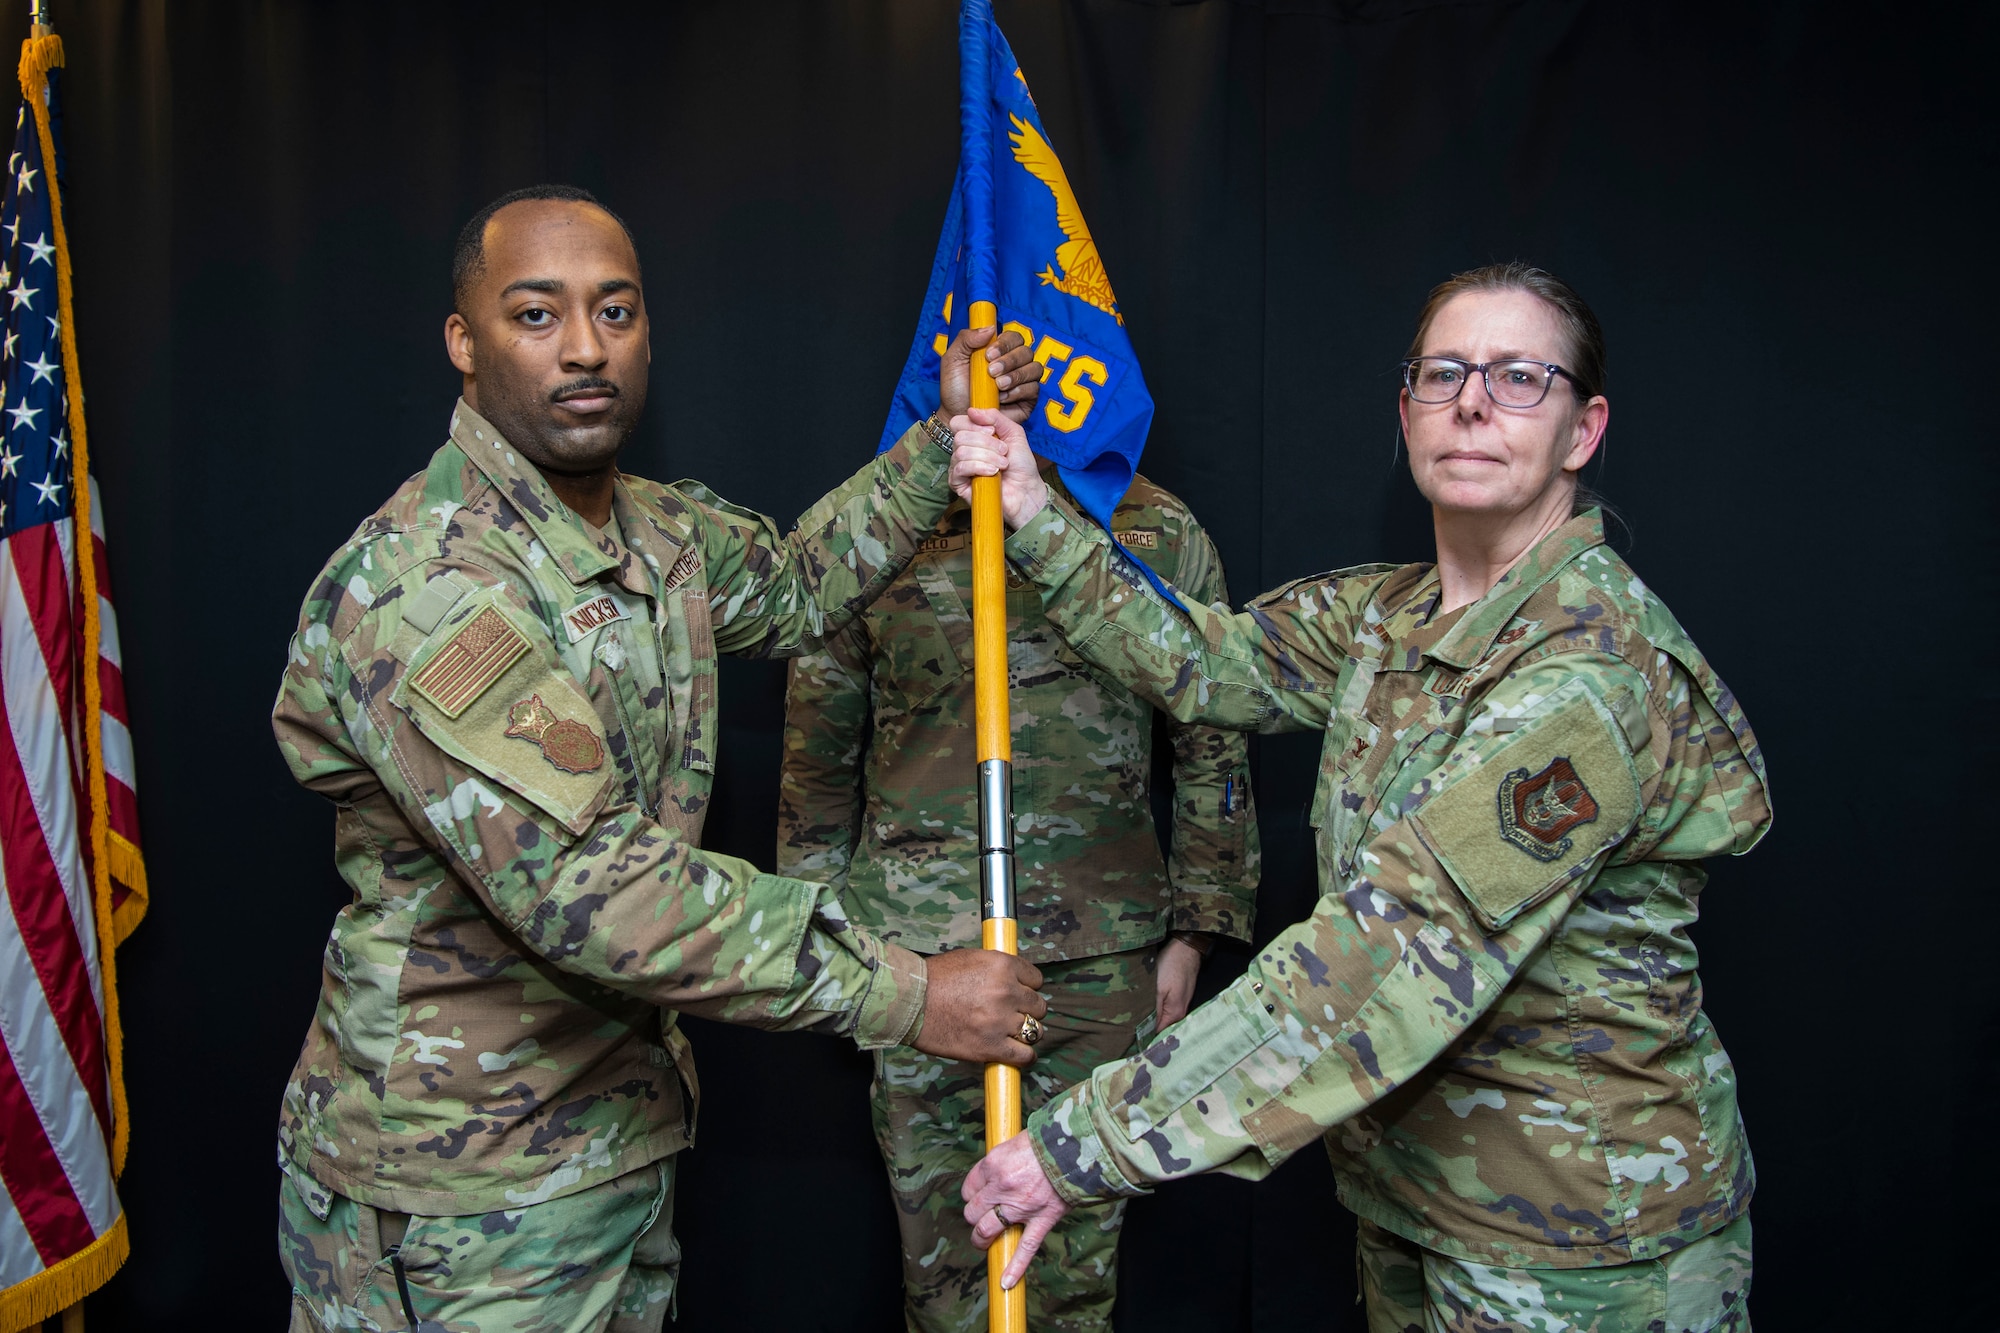 Col. Gretchen Wiltse, 434th Mission Support Group commander, passes the guidon to Capt. Chadwick Nickson during a change of commander ceremony, February 4, 2023, at Grissom Air Reserve Base, Indiana. Nickson took command of the 434th Security Forces Squadron. (U.S. Air Force photo by Staff Sgt. Alexa Culbert)